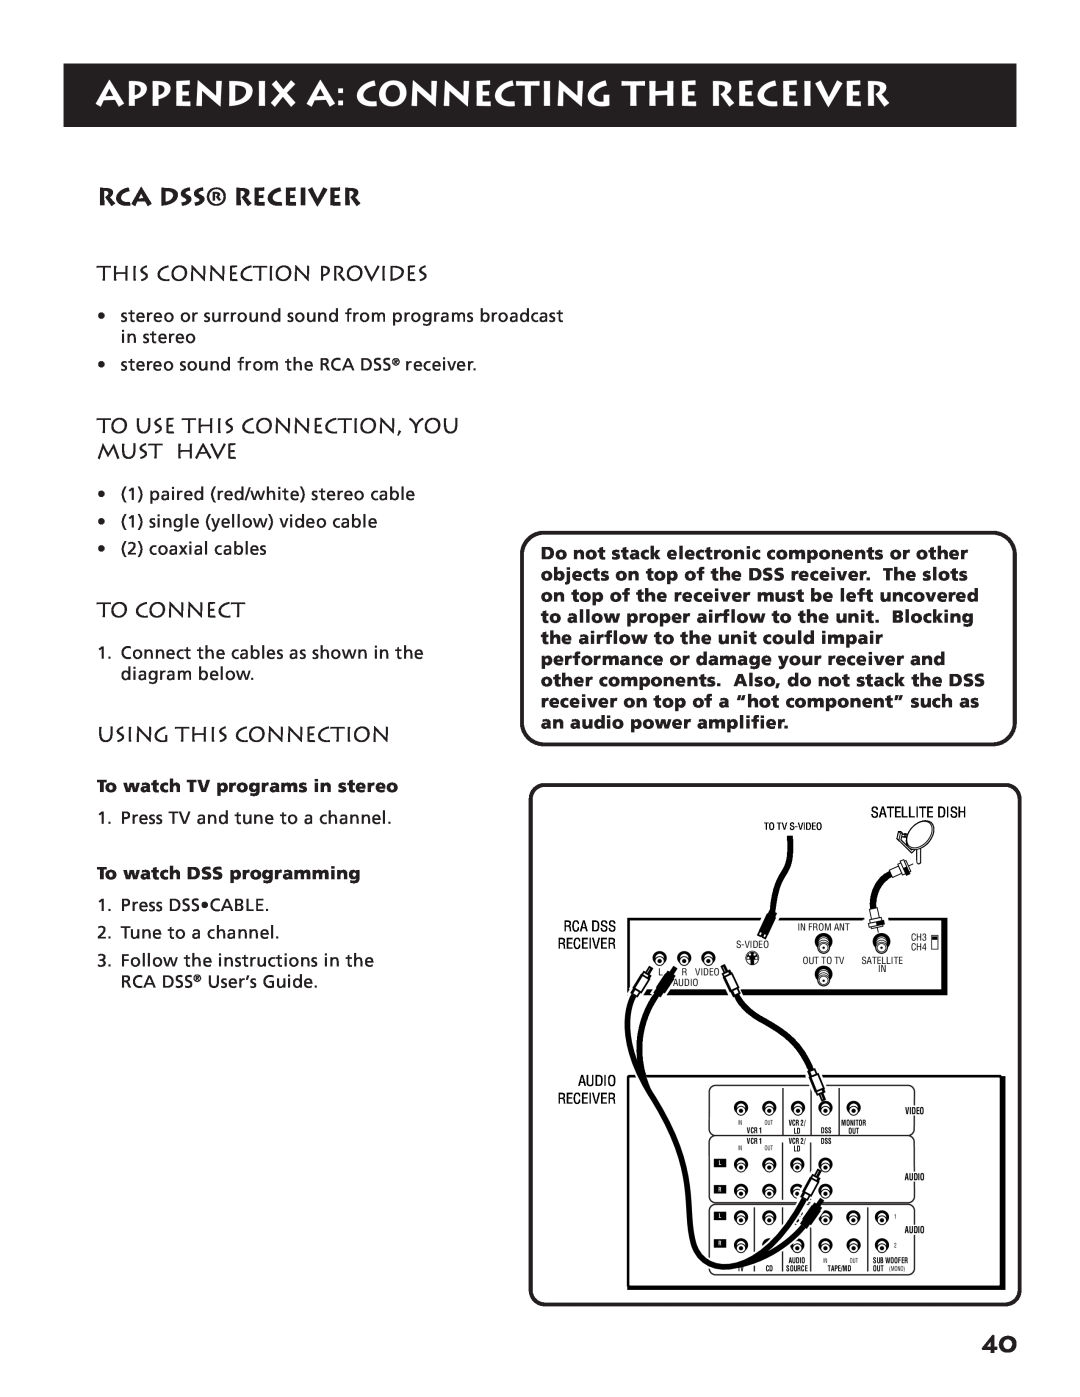 RCA RV3693 manual Rca Dss Receiver, Appendix A Connecting The Receiver, This Connection Provides, To Connect 